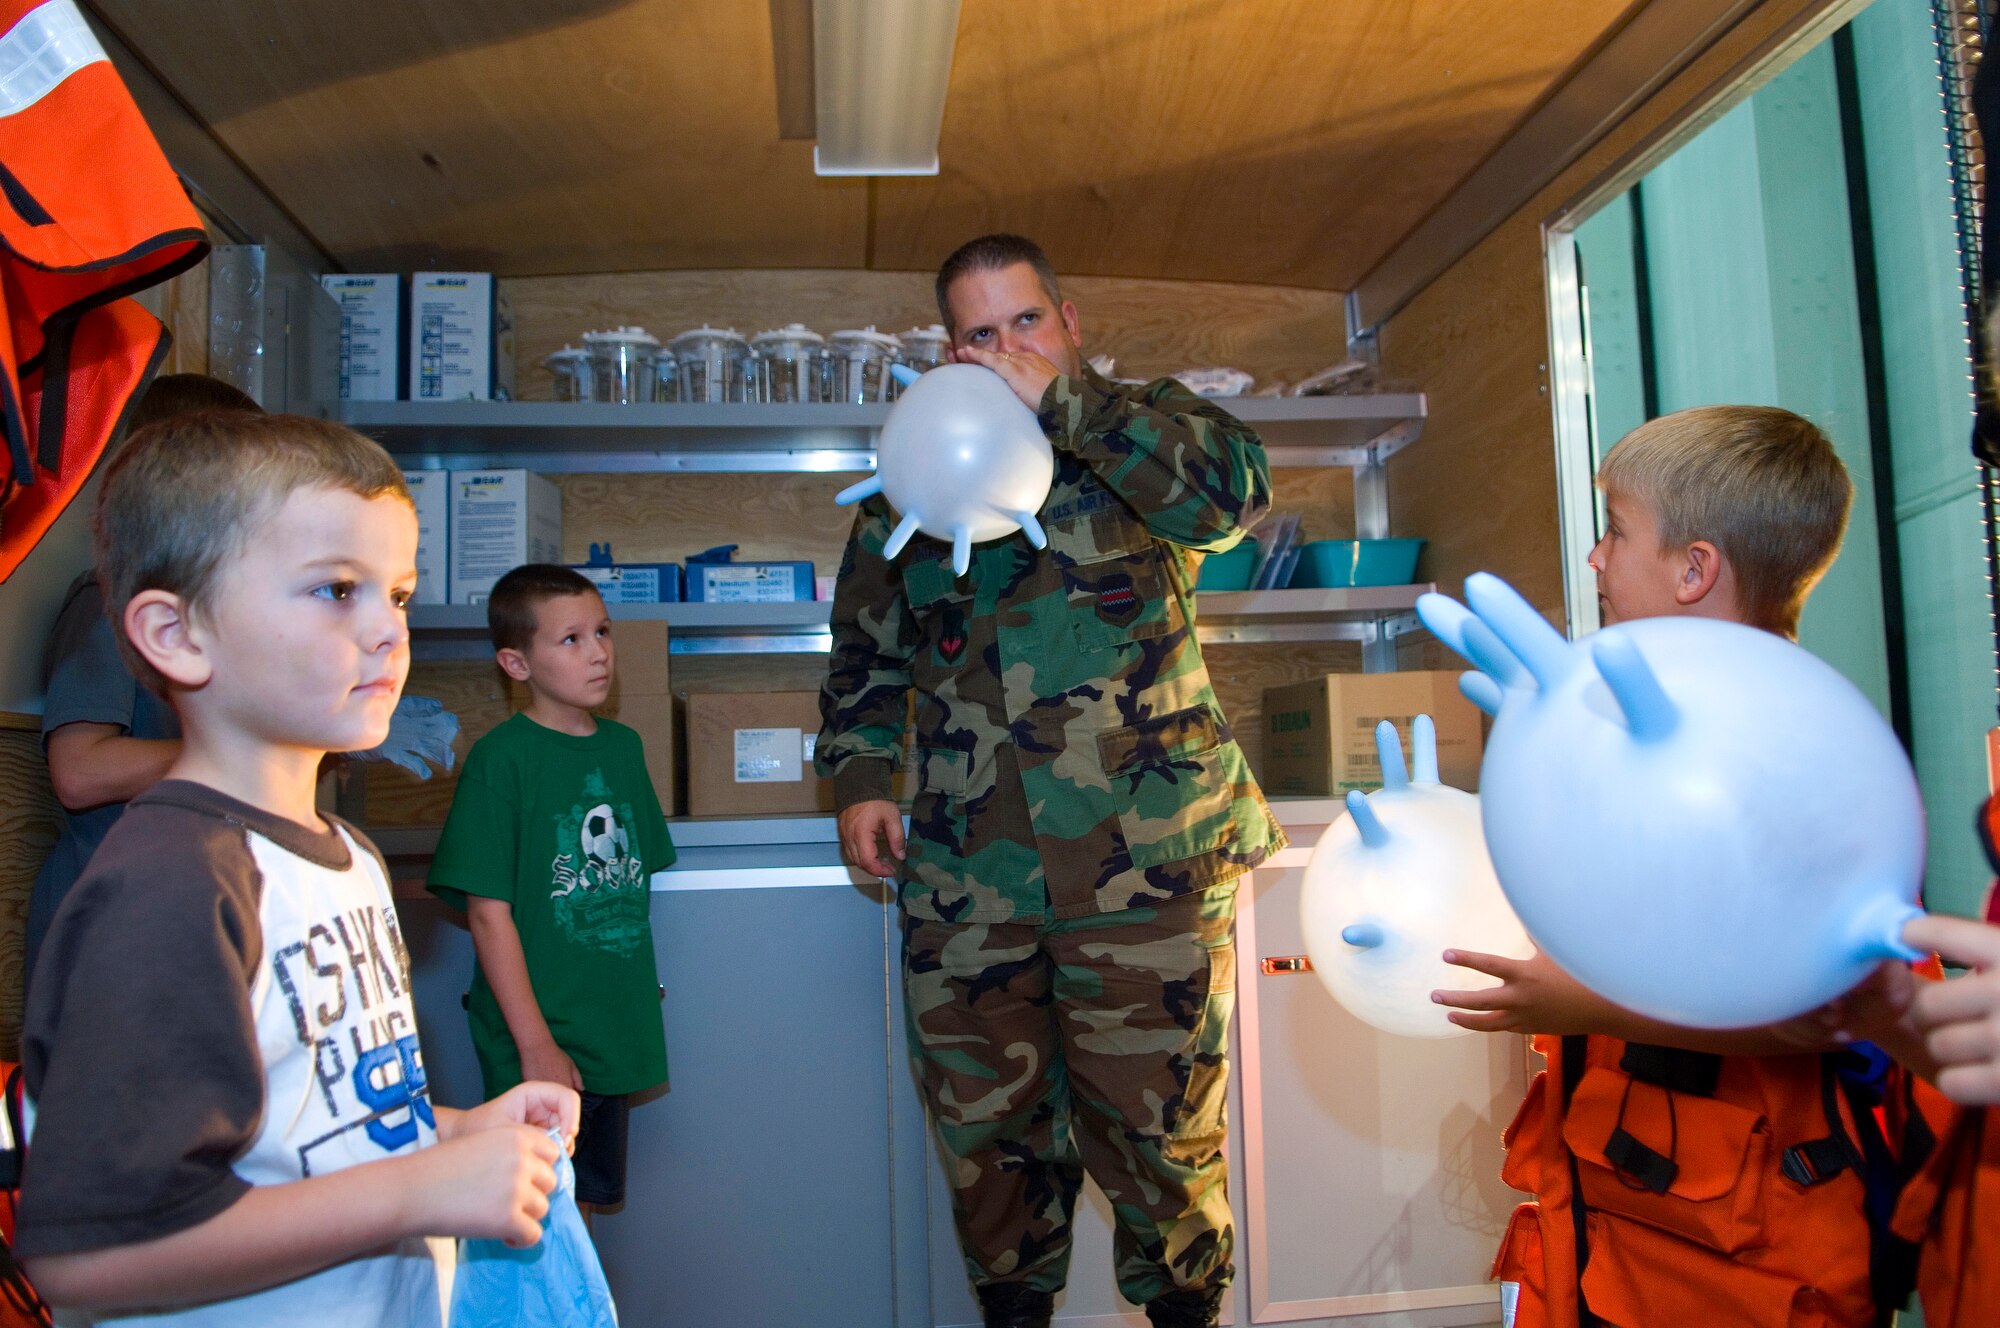 Tech. Sgt. Shane Doxdon makes glove balloons for children visiting the Strategic Air and Space Museum during Air Force Week in the Heartland Aug. 13 in Ashland, Neb. Museum officials hosted a day dedicated to the legacy of airpower providing special Air Force demonstration teams and displays. Sergeant Doxdon is a member of the 55th Medical Group from Offutt Air Force Base, Neb. (U.S. Air Force photo/Staff Sgt. Bennie J. Davis III)